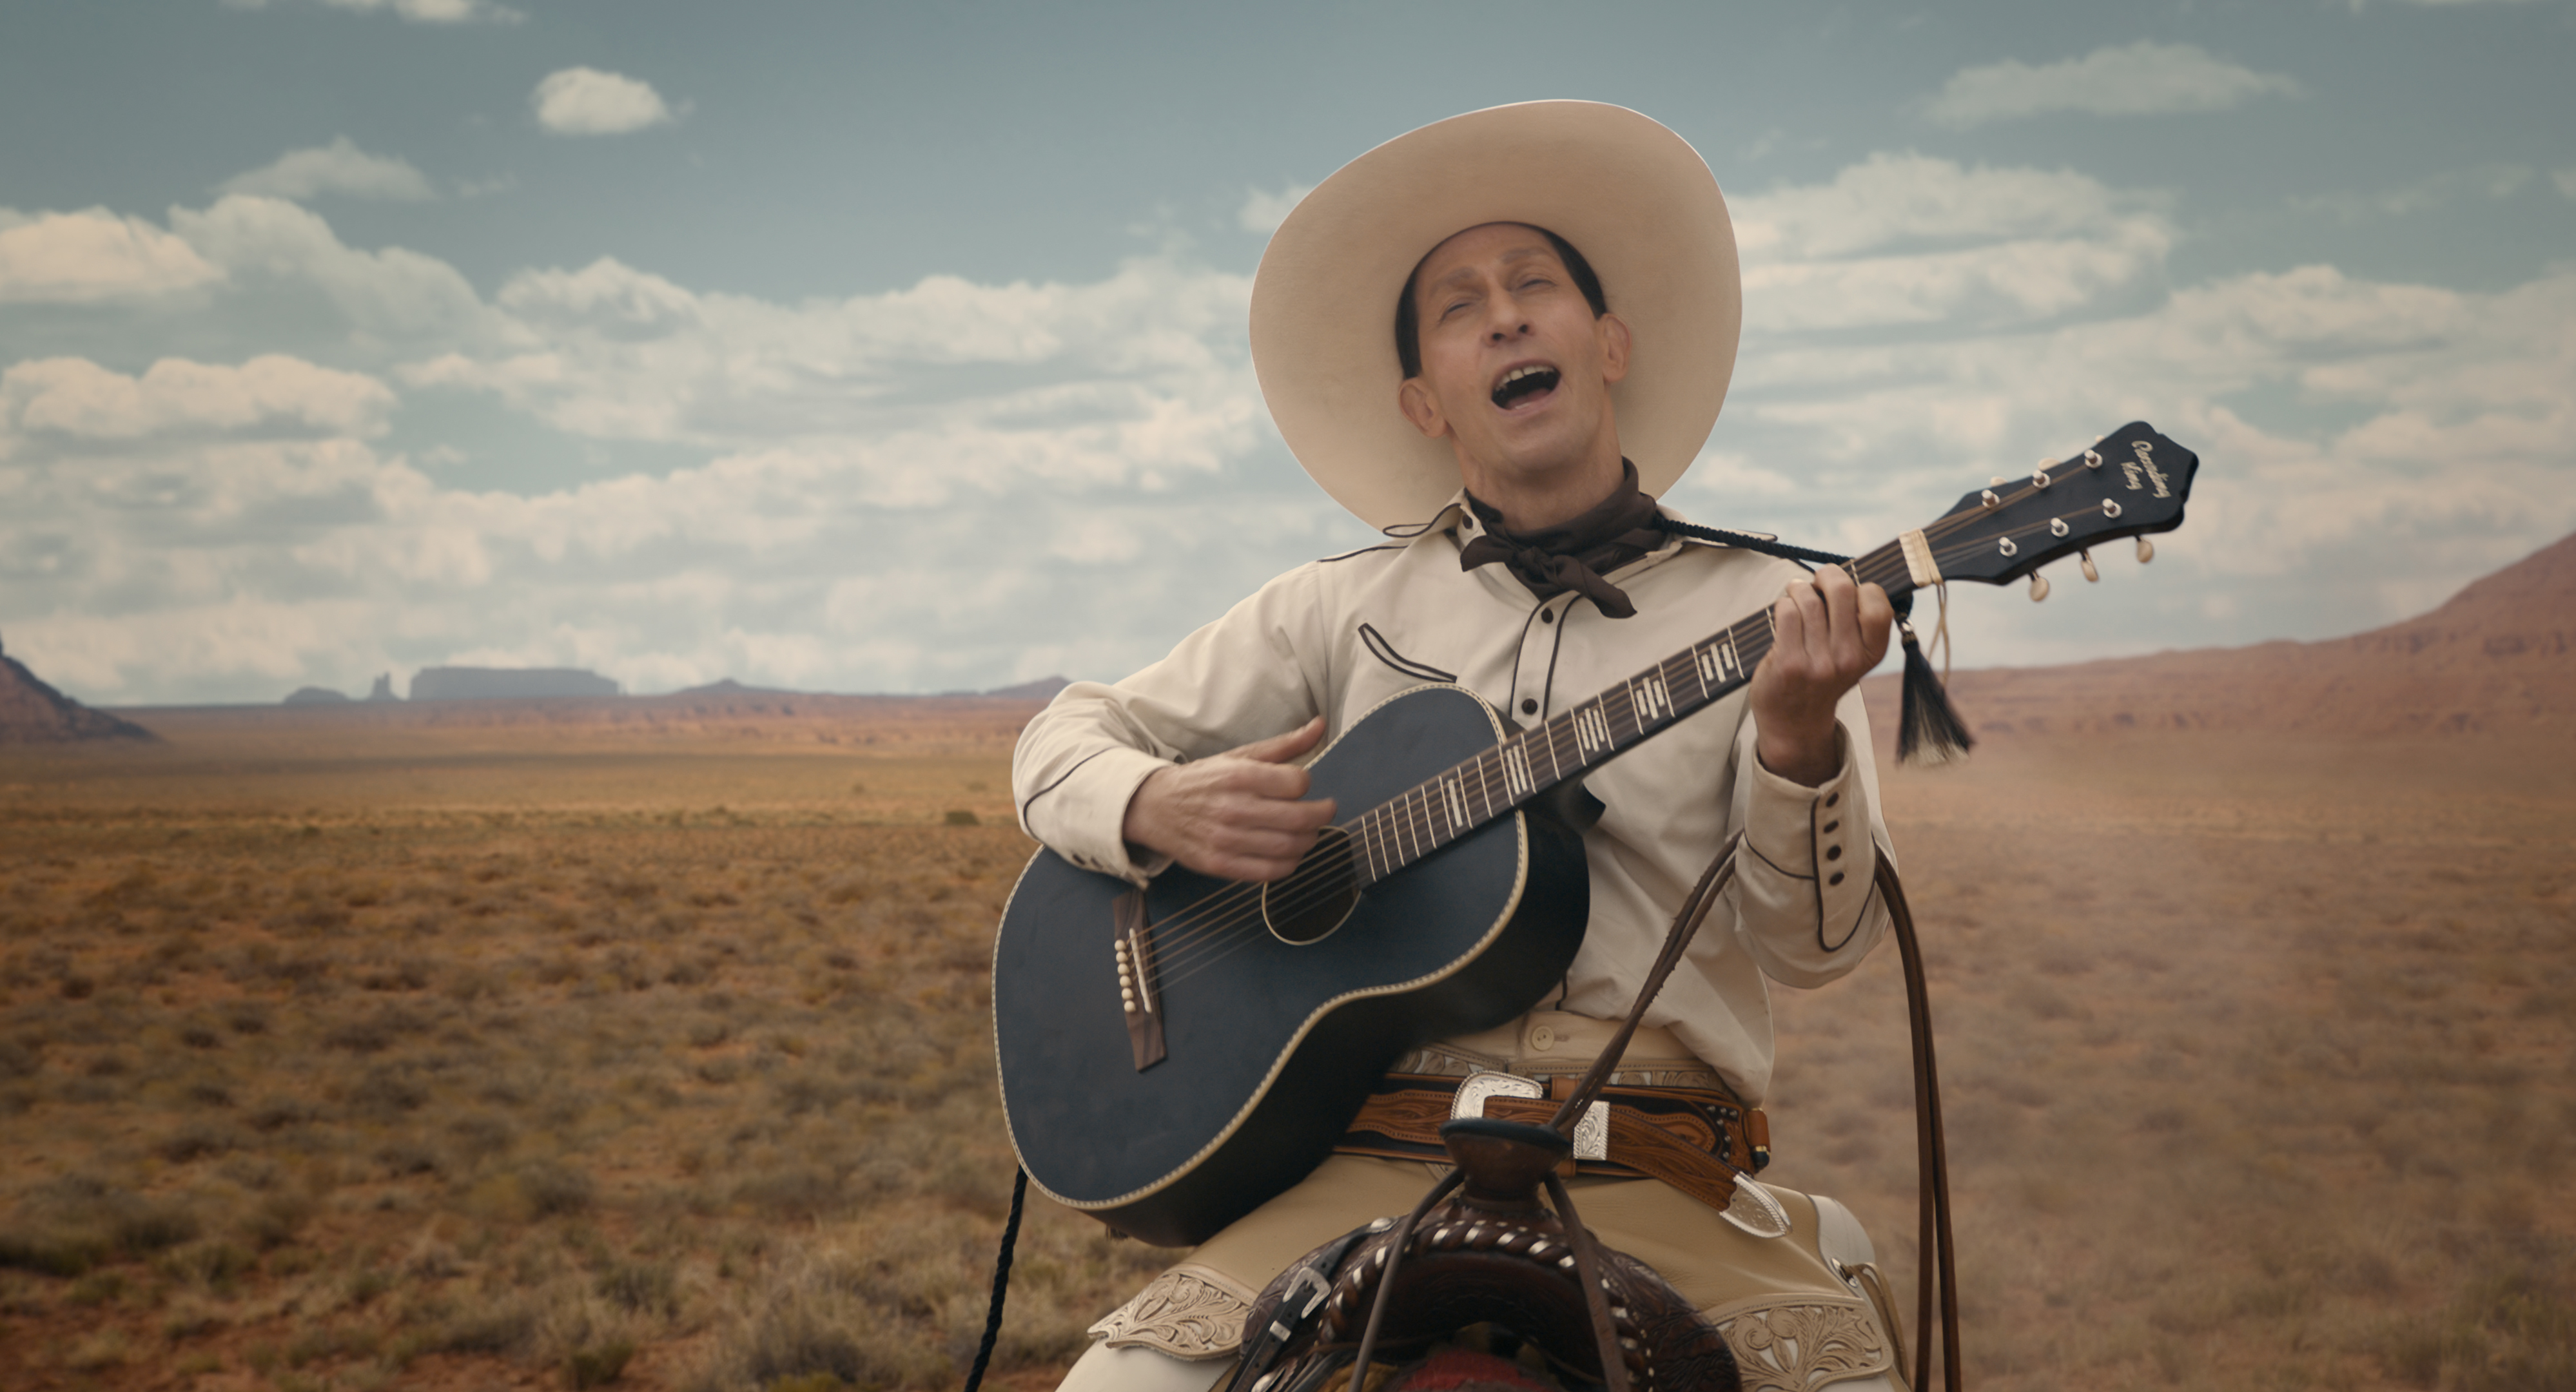 Lot # 29: THE BALLAD OF BUSTER SCRUGGS - The Kid's (Willie